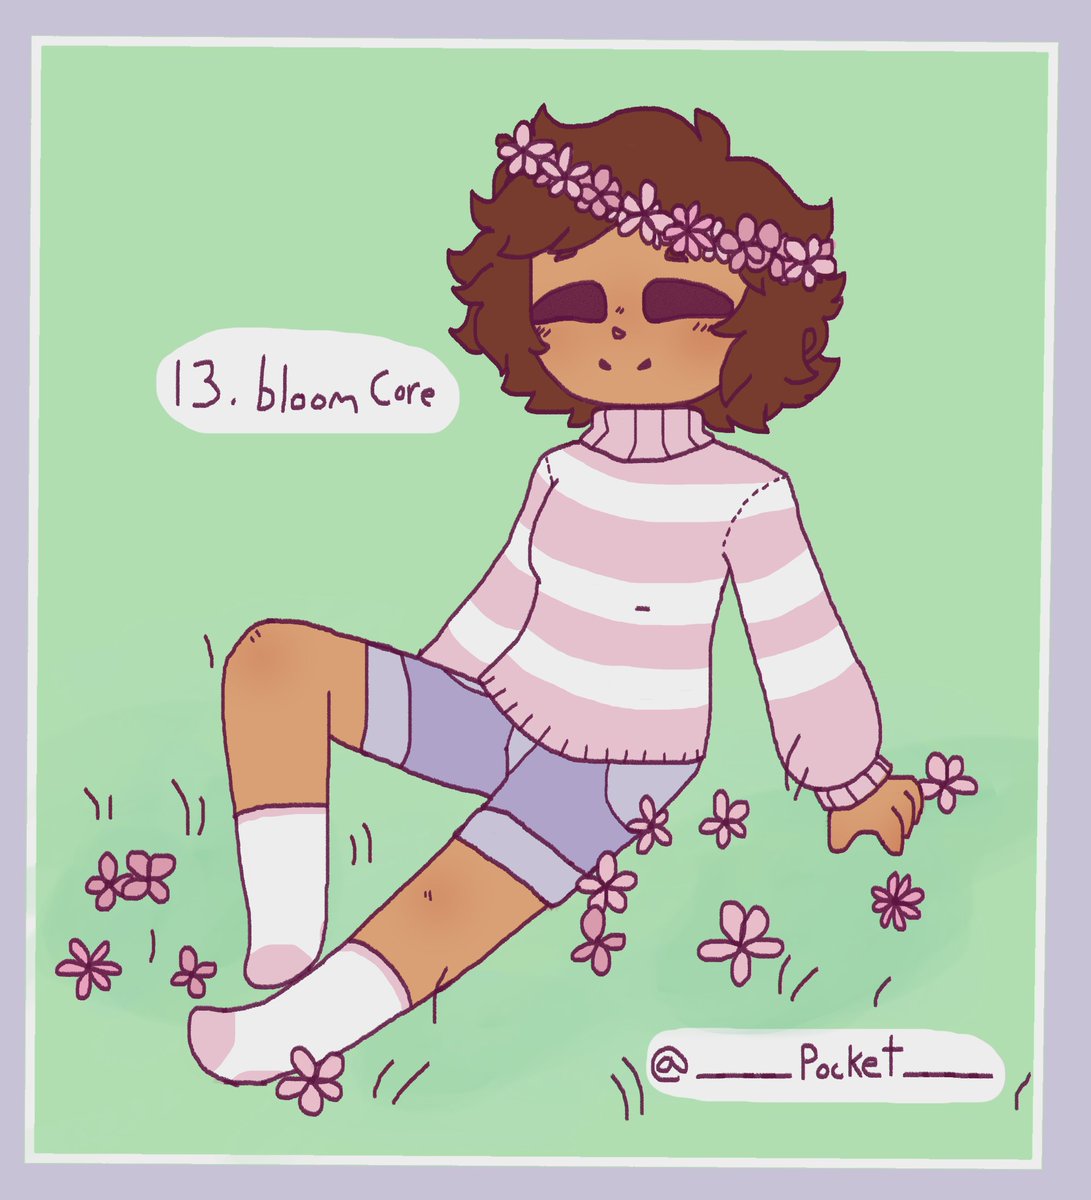 finally caught up with the prompts! day 13 is bloomcore! pretty simple doodle but this was really fun to draw
#bloomcore #coretober #art